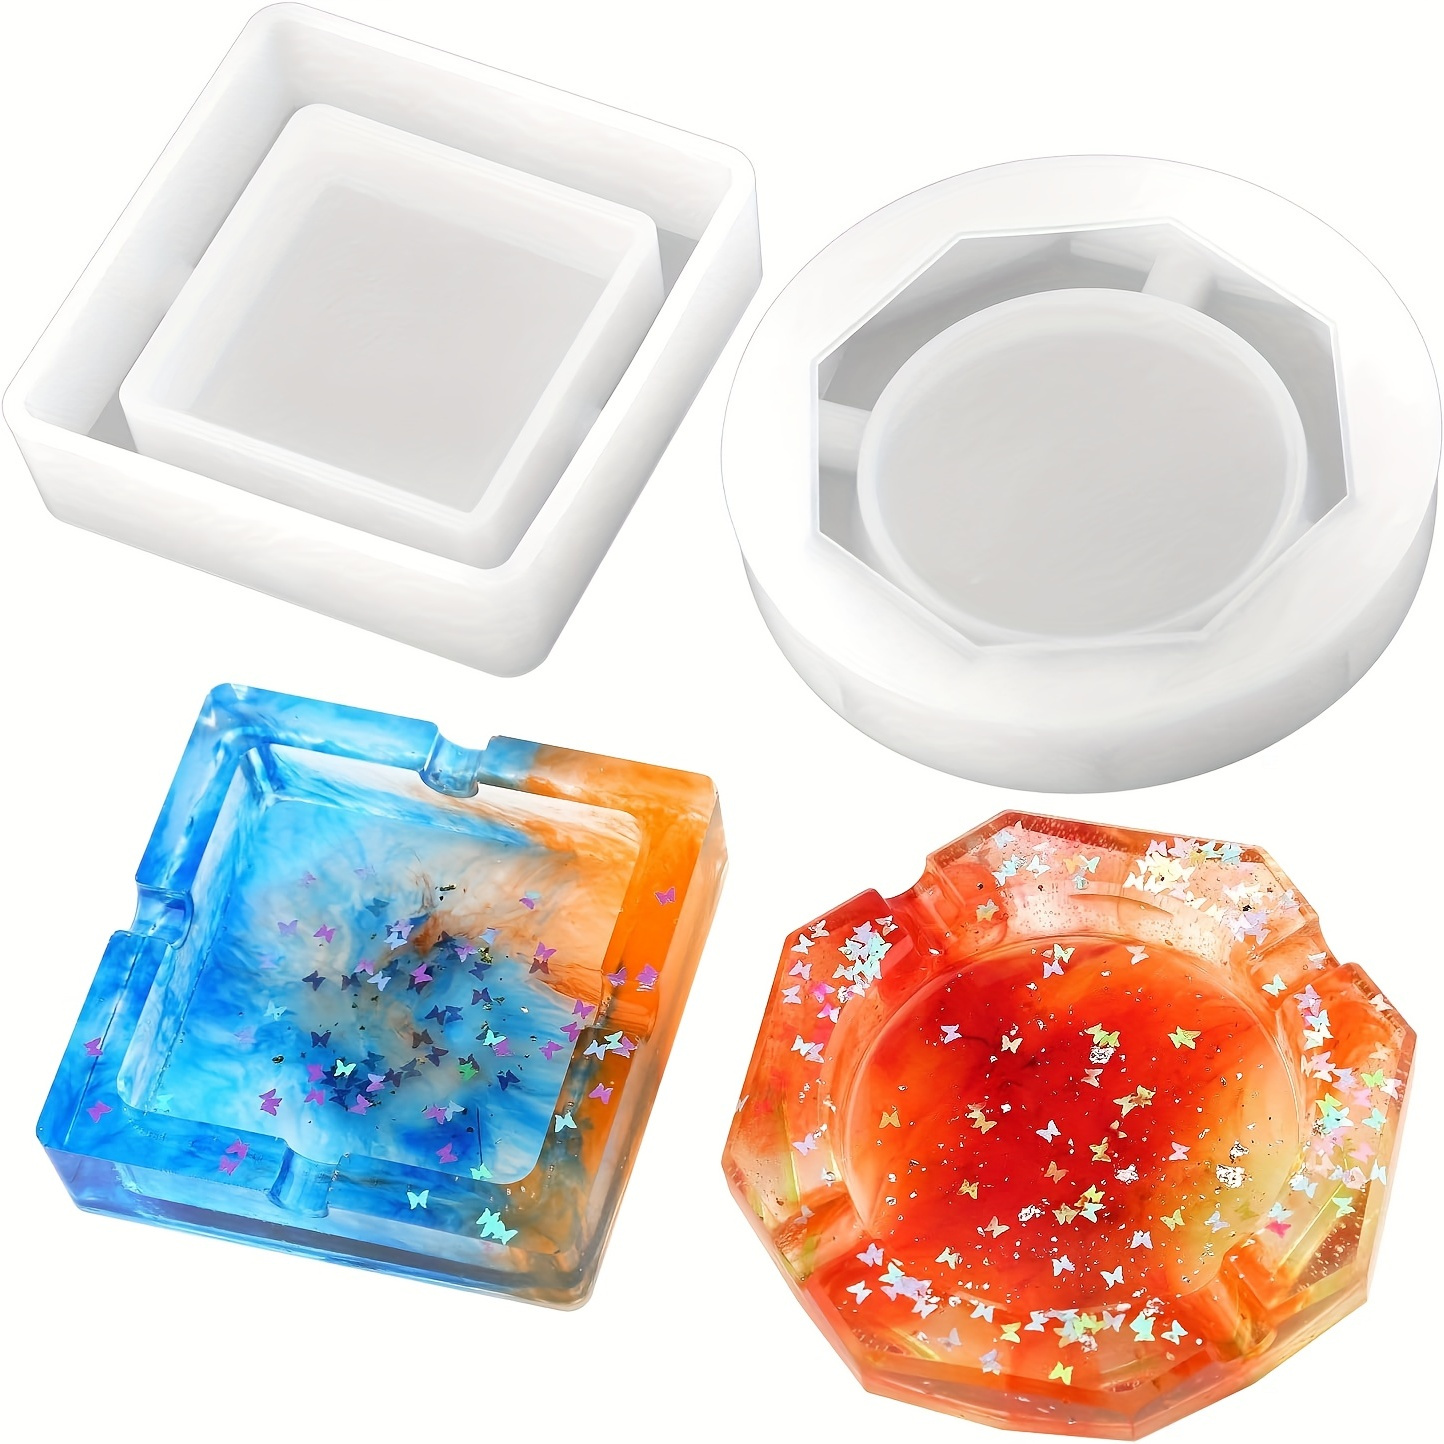 HLEC Silicone Resin Tray Mold,Large Irregular Tray Mold Epoxy Resin Mold with 2 Metal